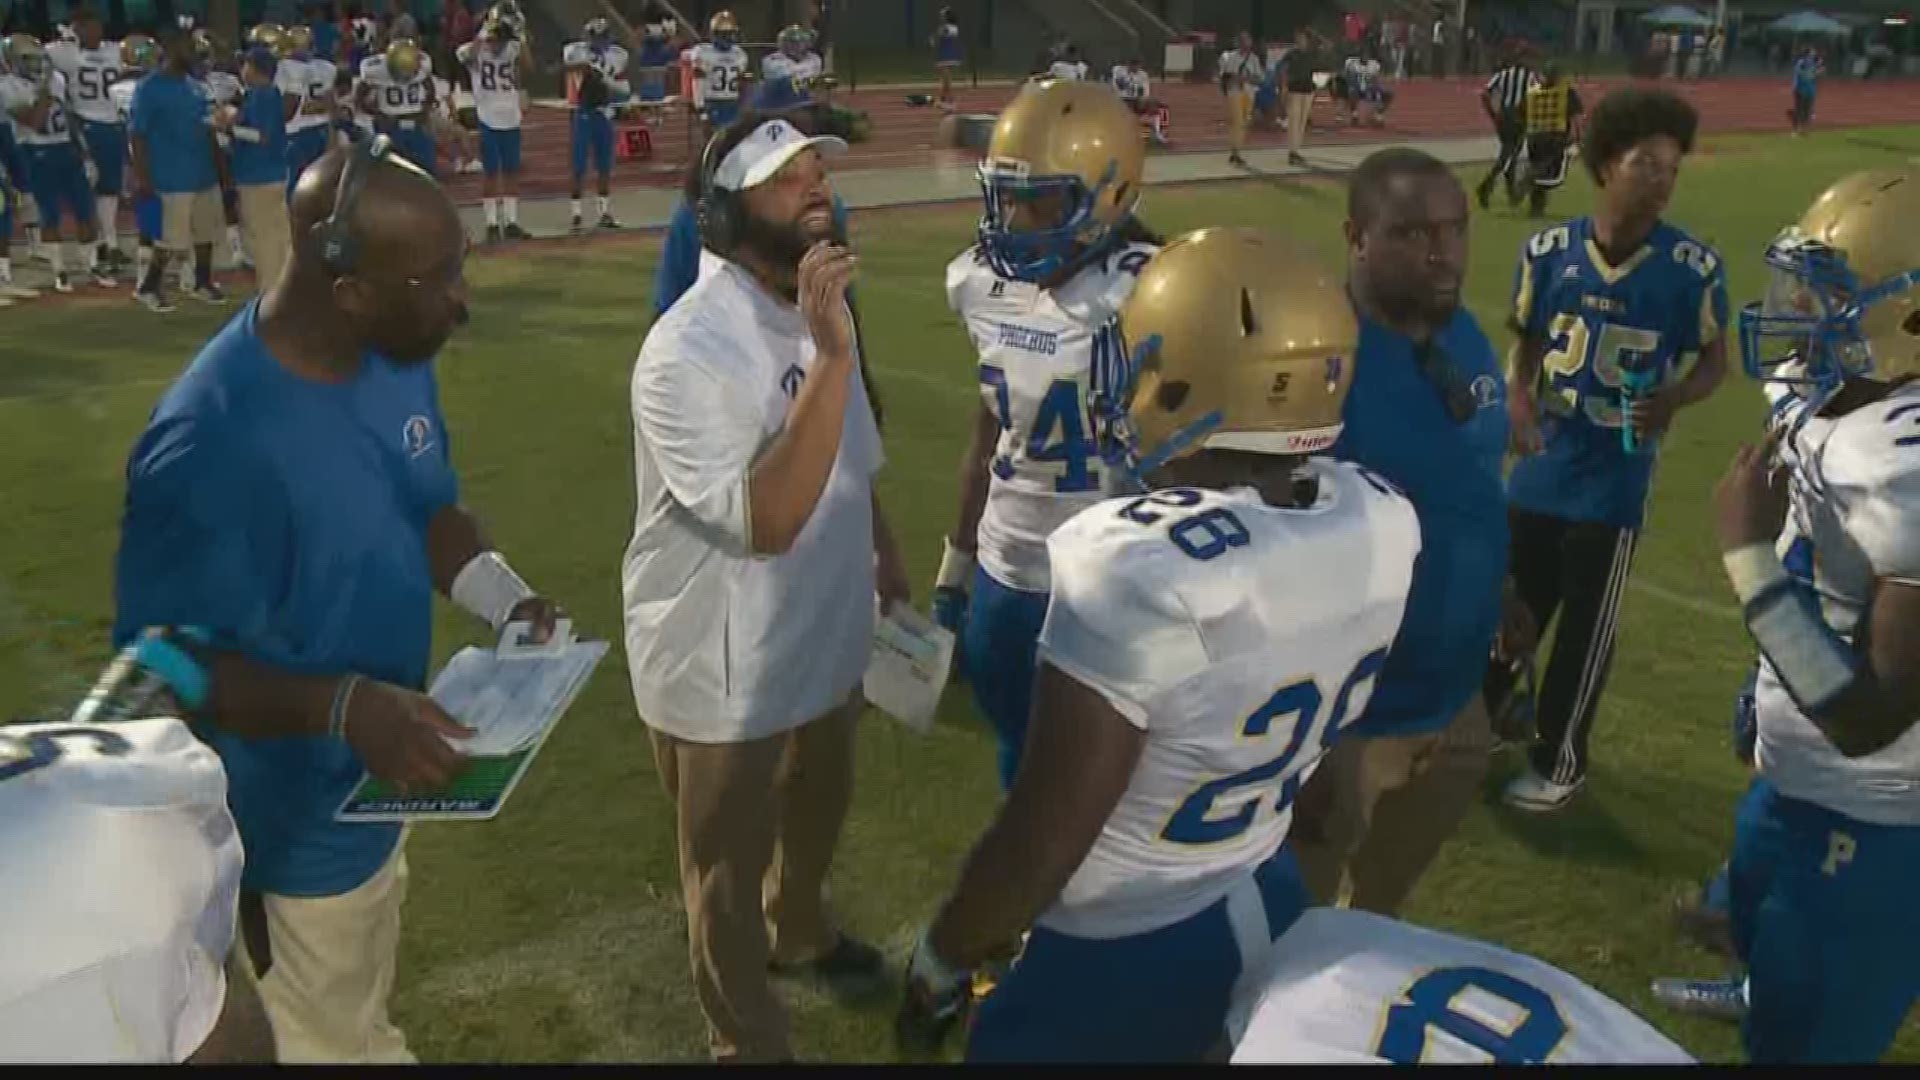 Phoebus was fairly dominant in their season opening game, a 40-14 win over Heritage.